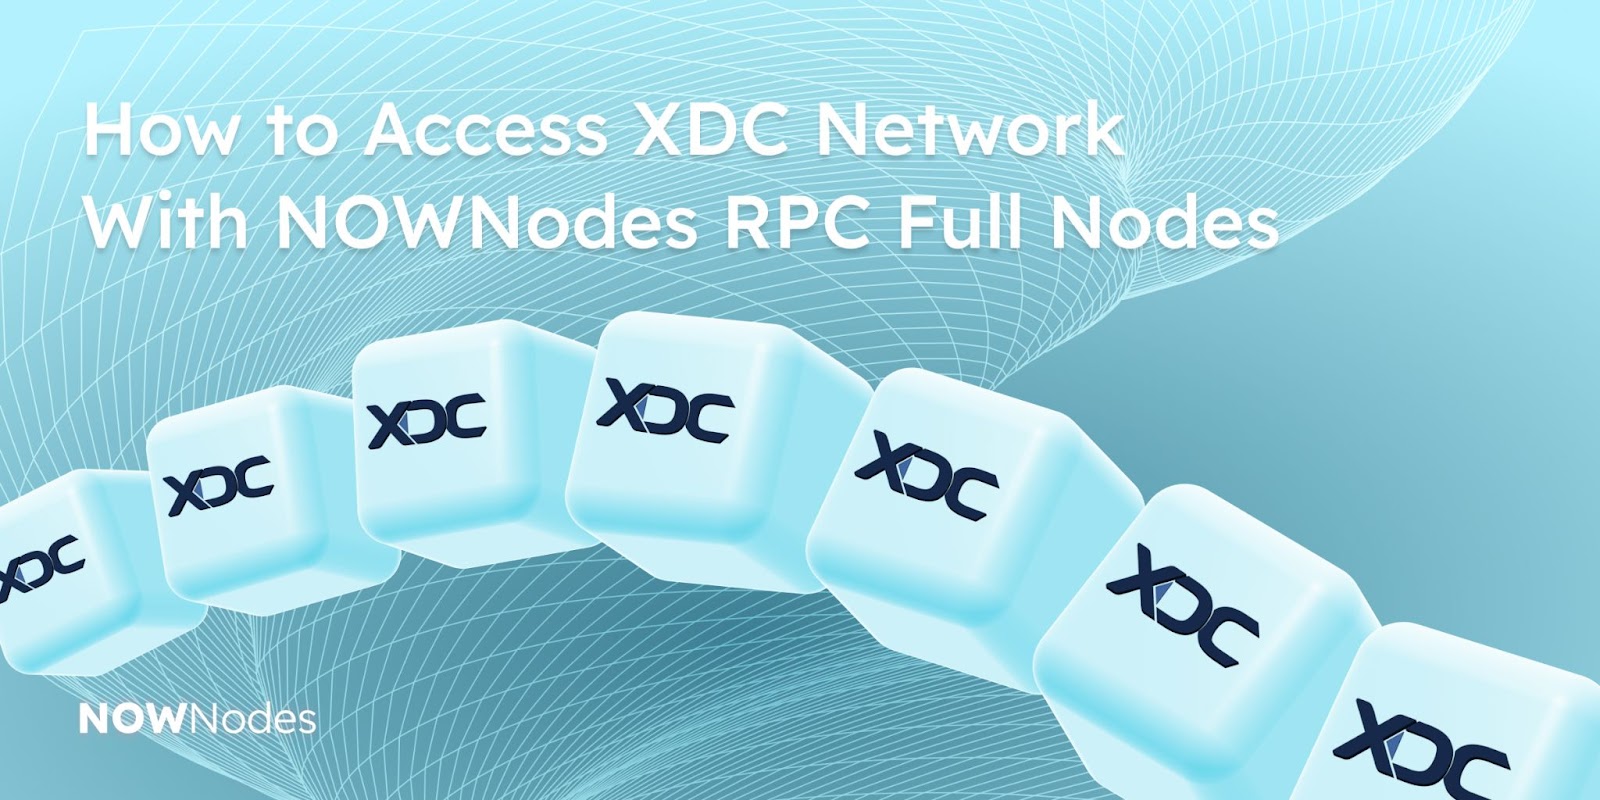 How to Access XDC Network With NOWNodes RPC Full Nodes